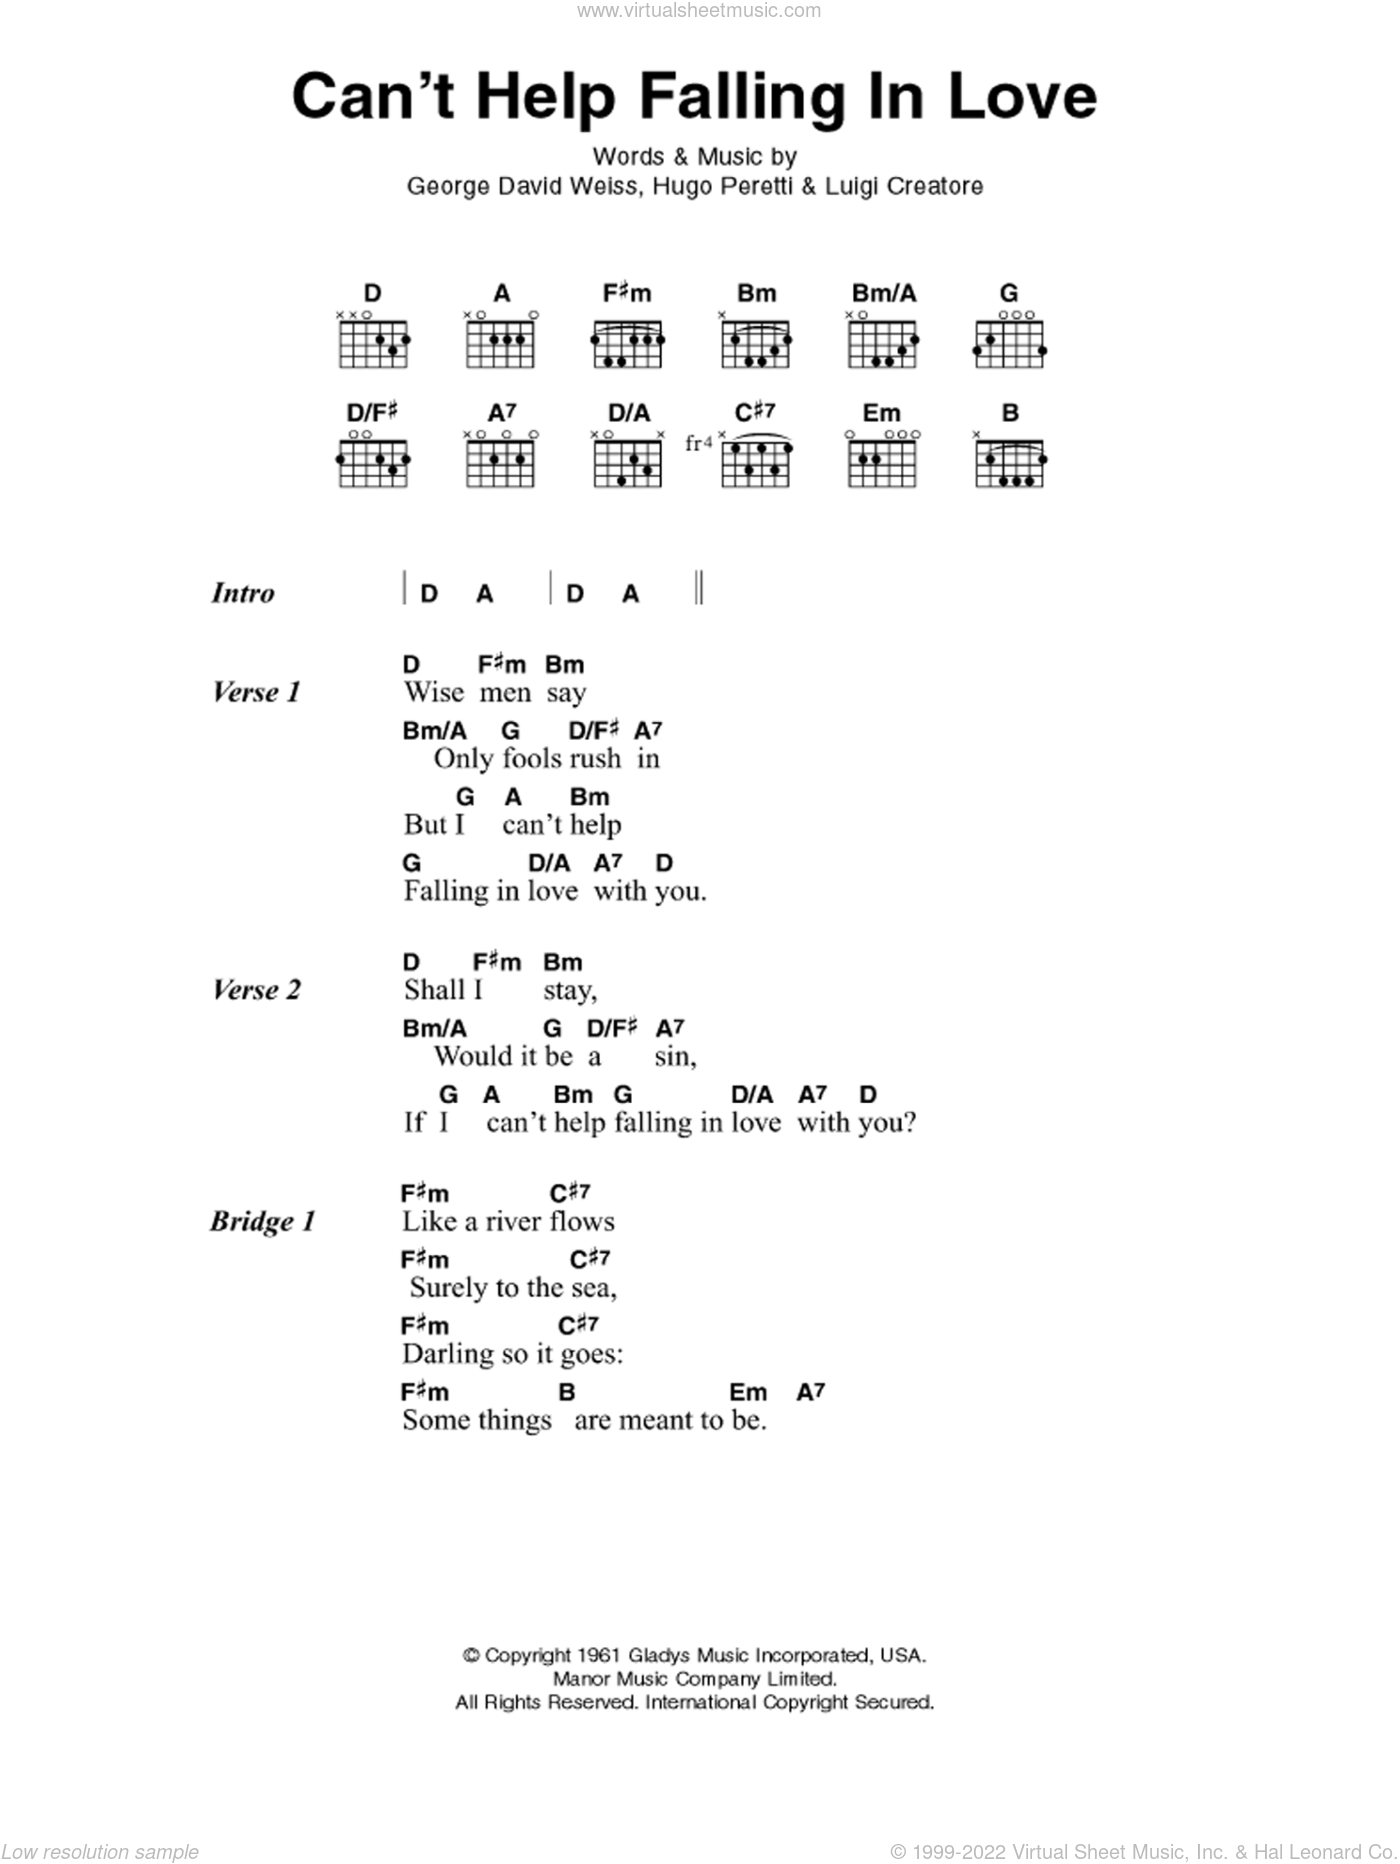 Presley - Can't Help Falling In Love sheet music for guitar (chords)